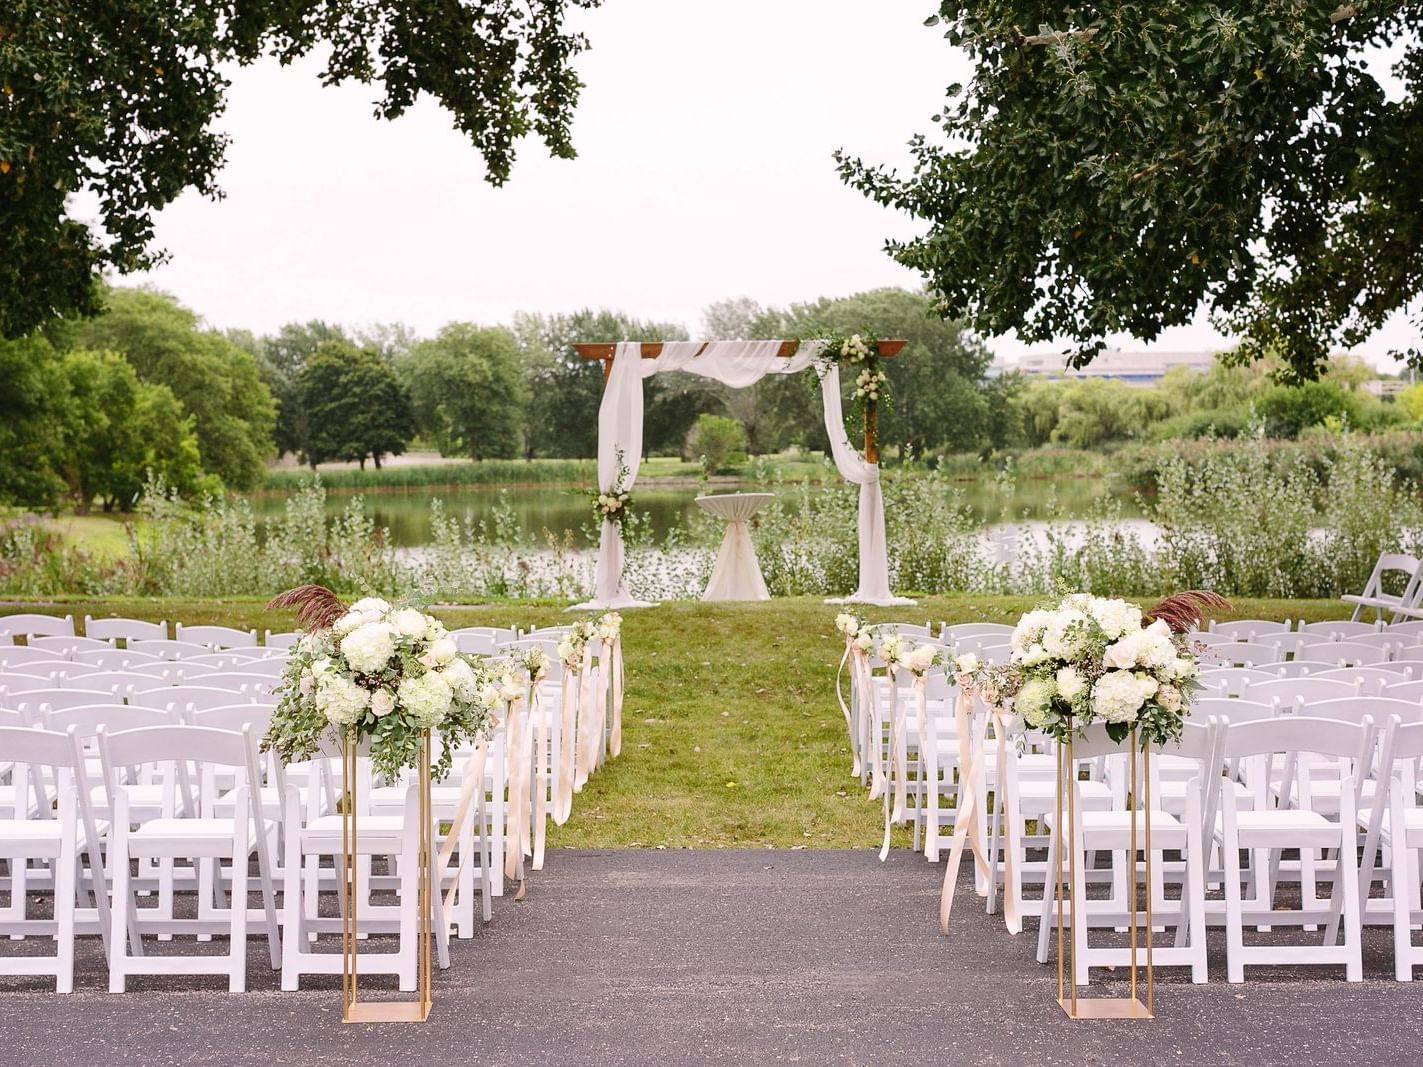 chairs for a wedding ceremony outside